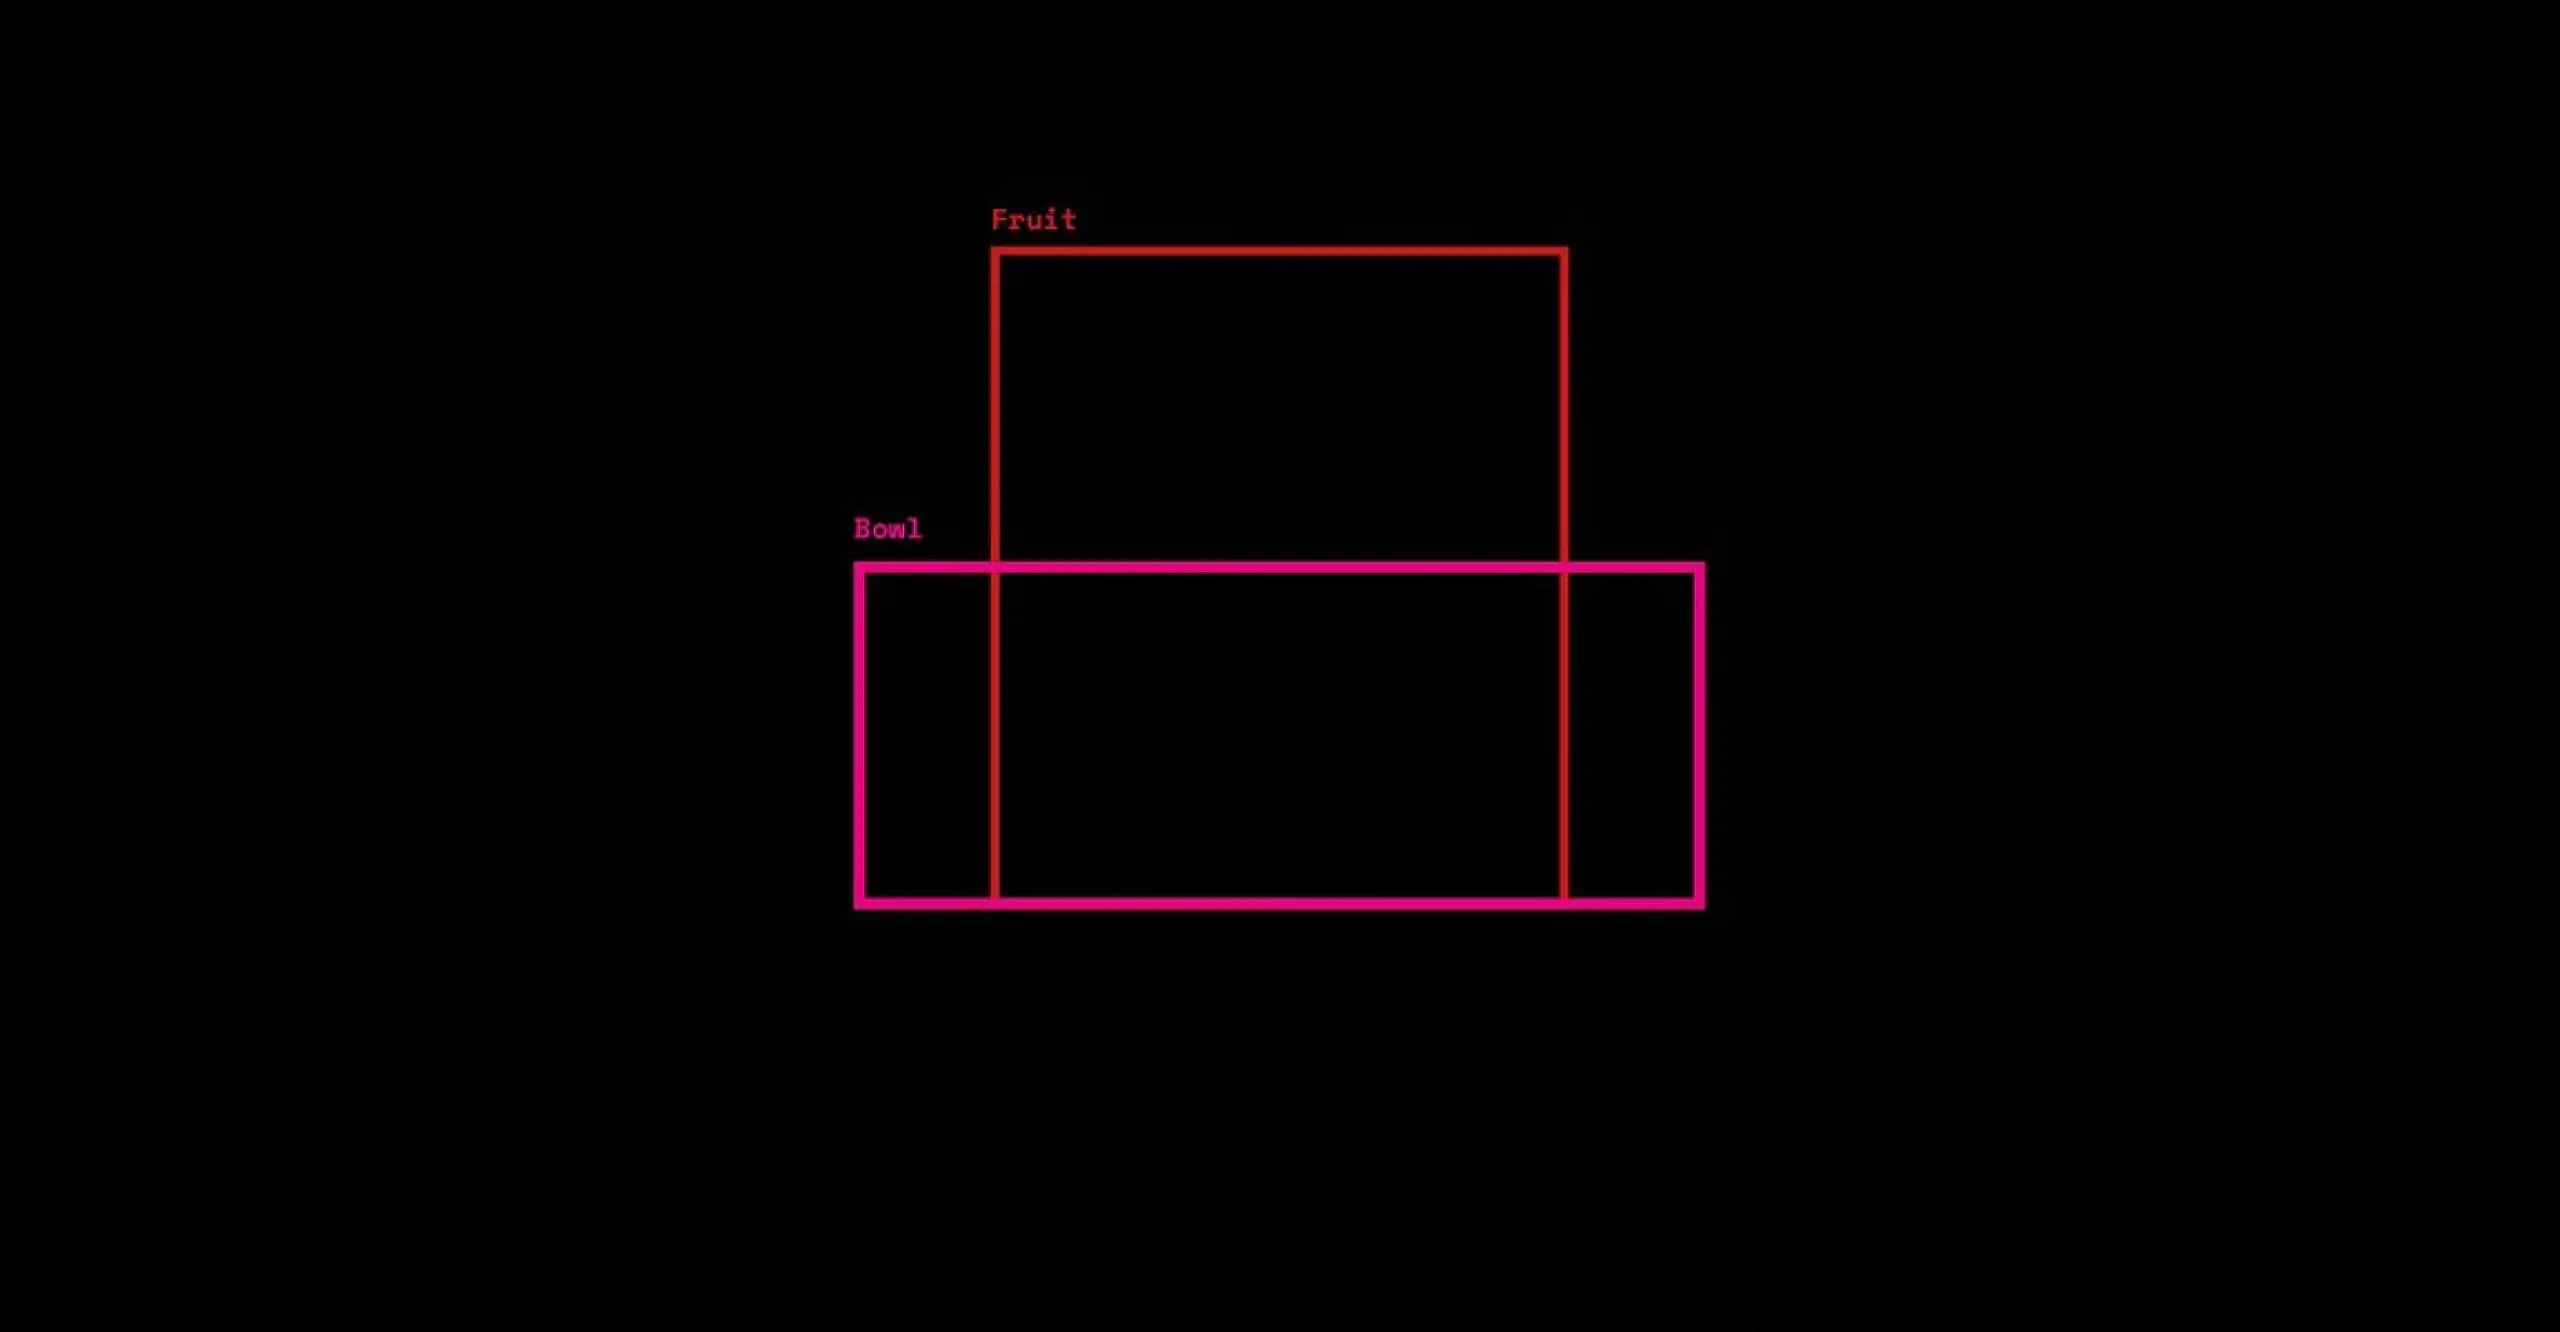 A landscape pink rectangle tagged as 'bowl' and a portrait red rectangle tagged as 'fruit'